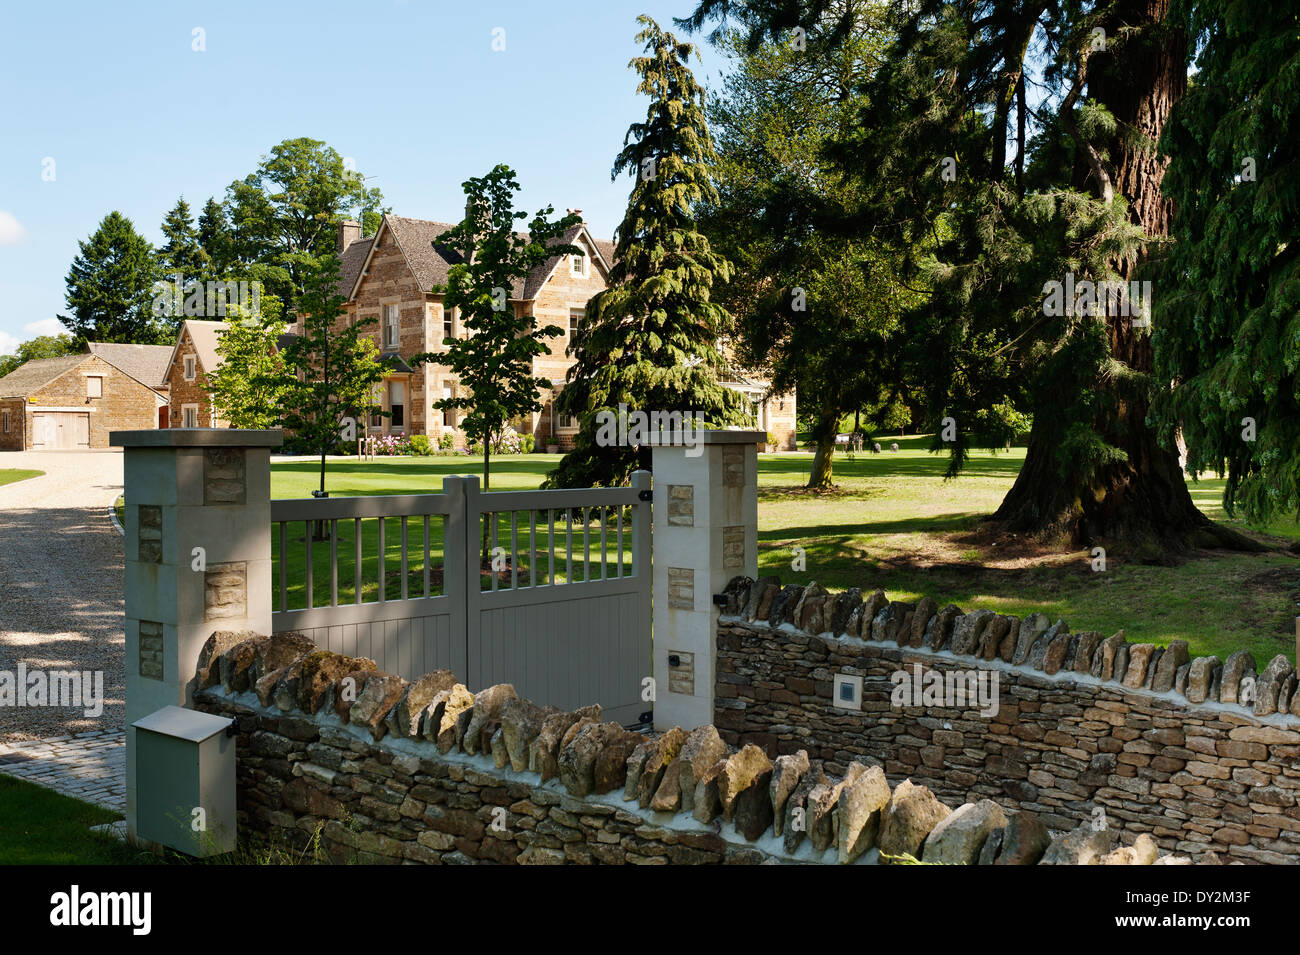 Entrance gates and driveway of victorian farmhoue house with park-like gardens Stock Photo